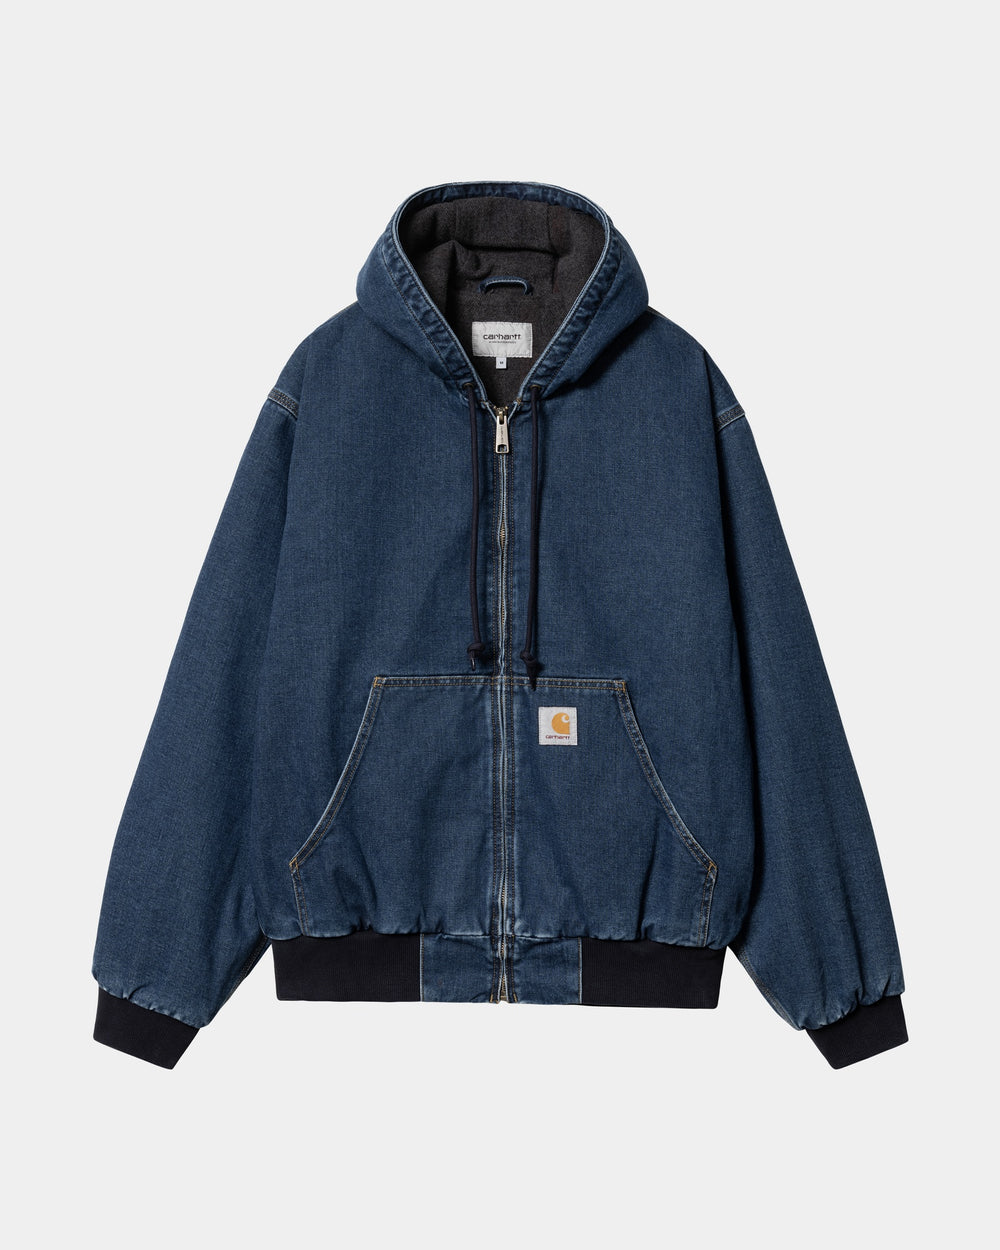 Carhartt WIP - CAHARTT WIP OG ACTIVE JACKET - DENIM (WINTER) IN BLUE (STONE WASHED) - Rent With Thred